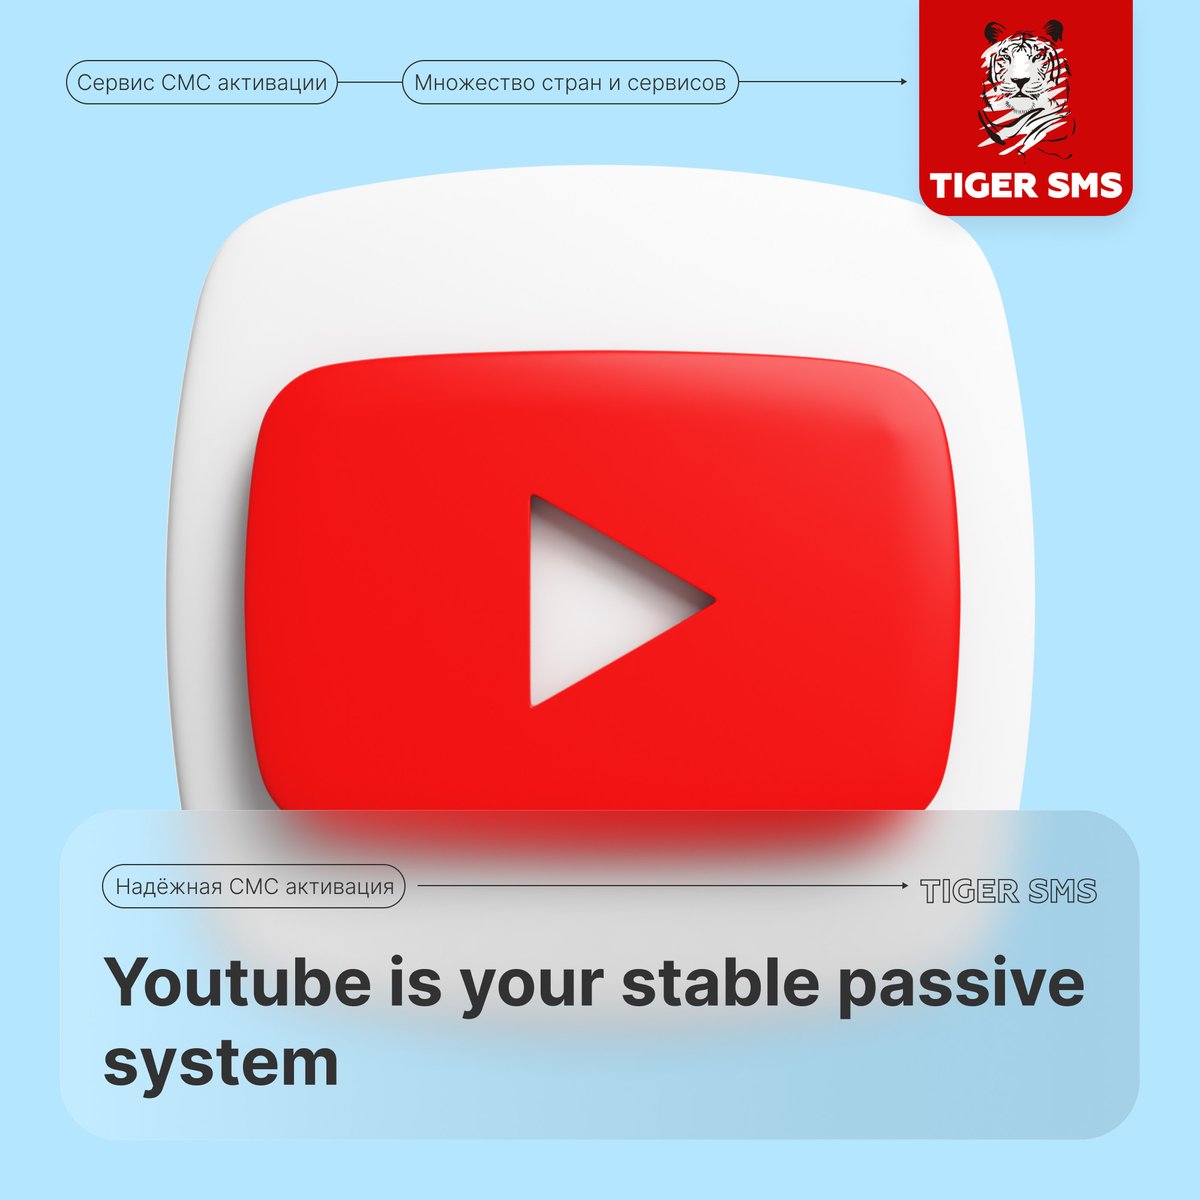 Your Youtube Business you didn't know about! It's the best time to fix it easily in 2023. Read more on our website tiger-sms(dot)com #youtube #youtubechannel #accountfarming #farming #businessidea #google #sms #smsactivation #tigersms #farm #farming #phonenumber #virtualnumber